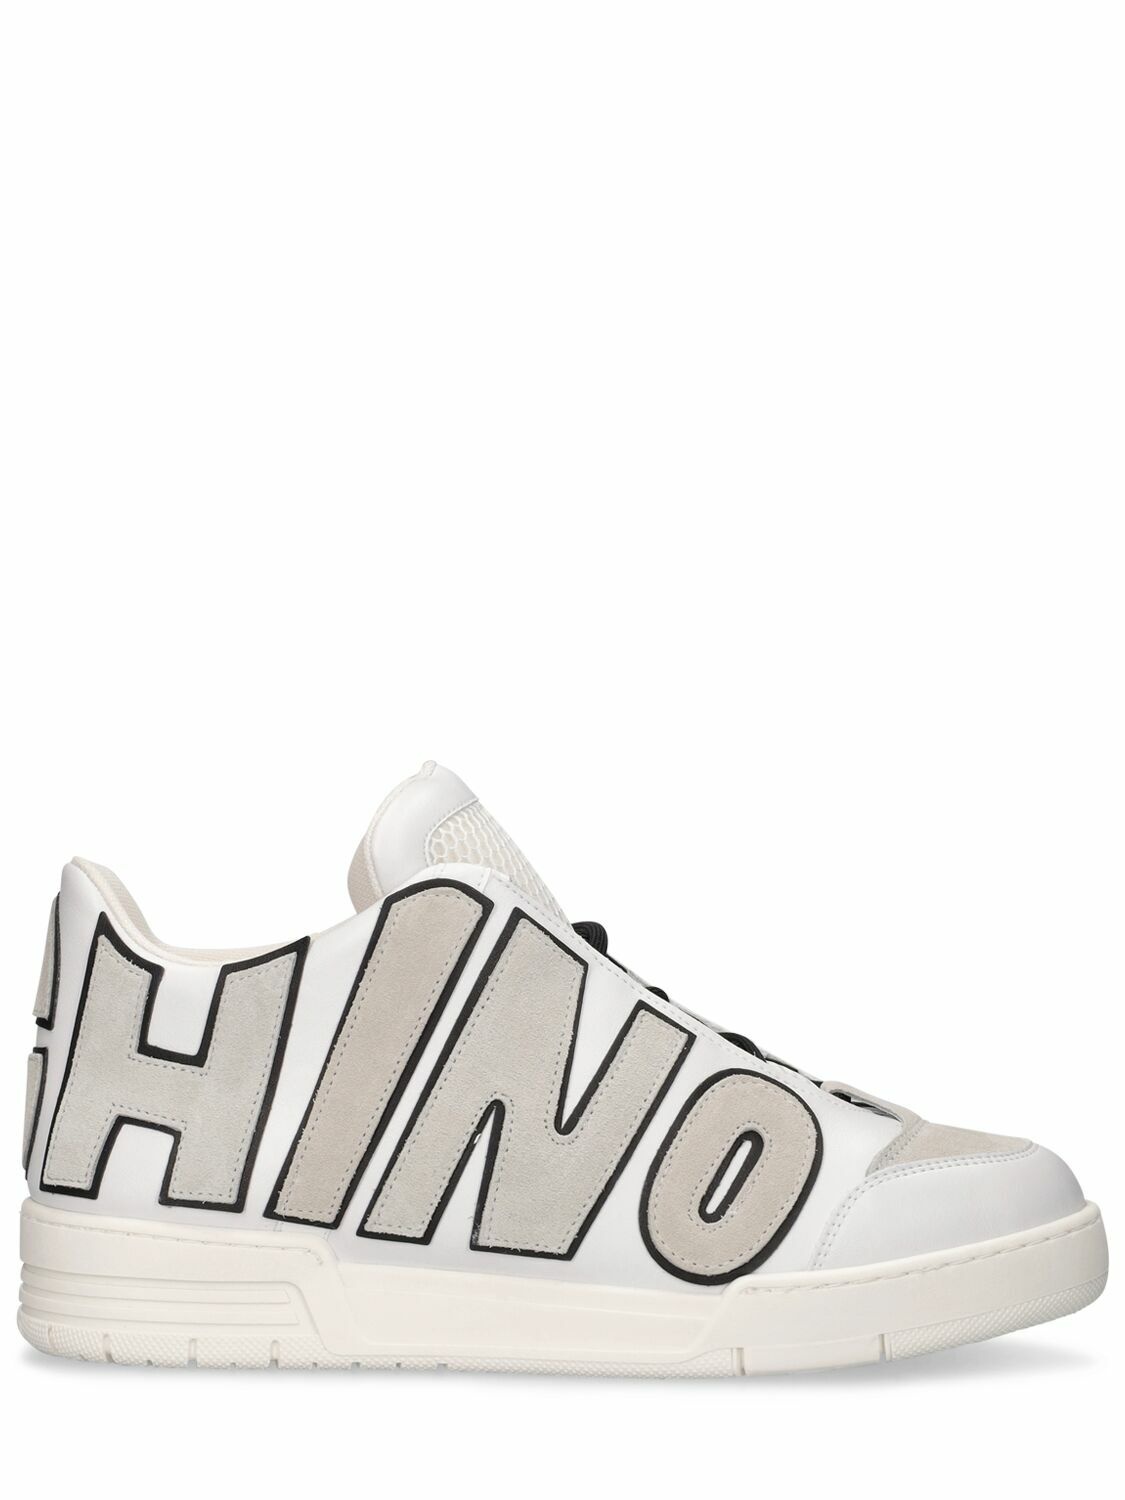 Photo: MOSCHINO - Logo Leather Mid Top Sneakers